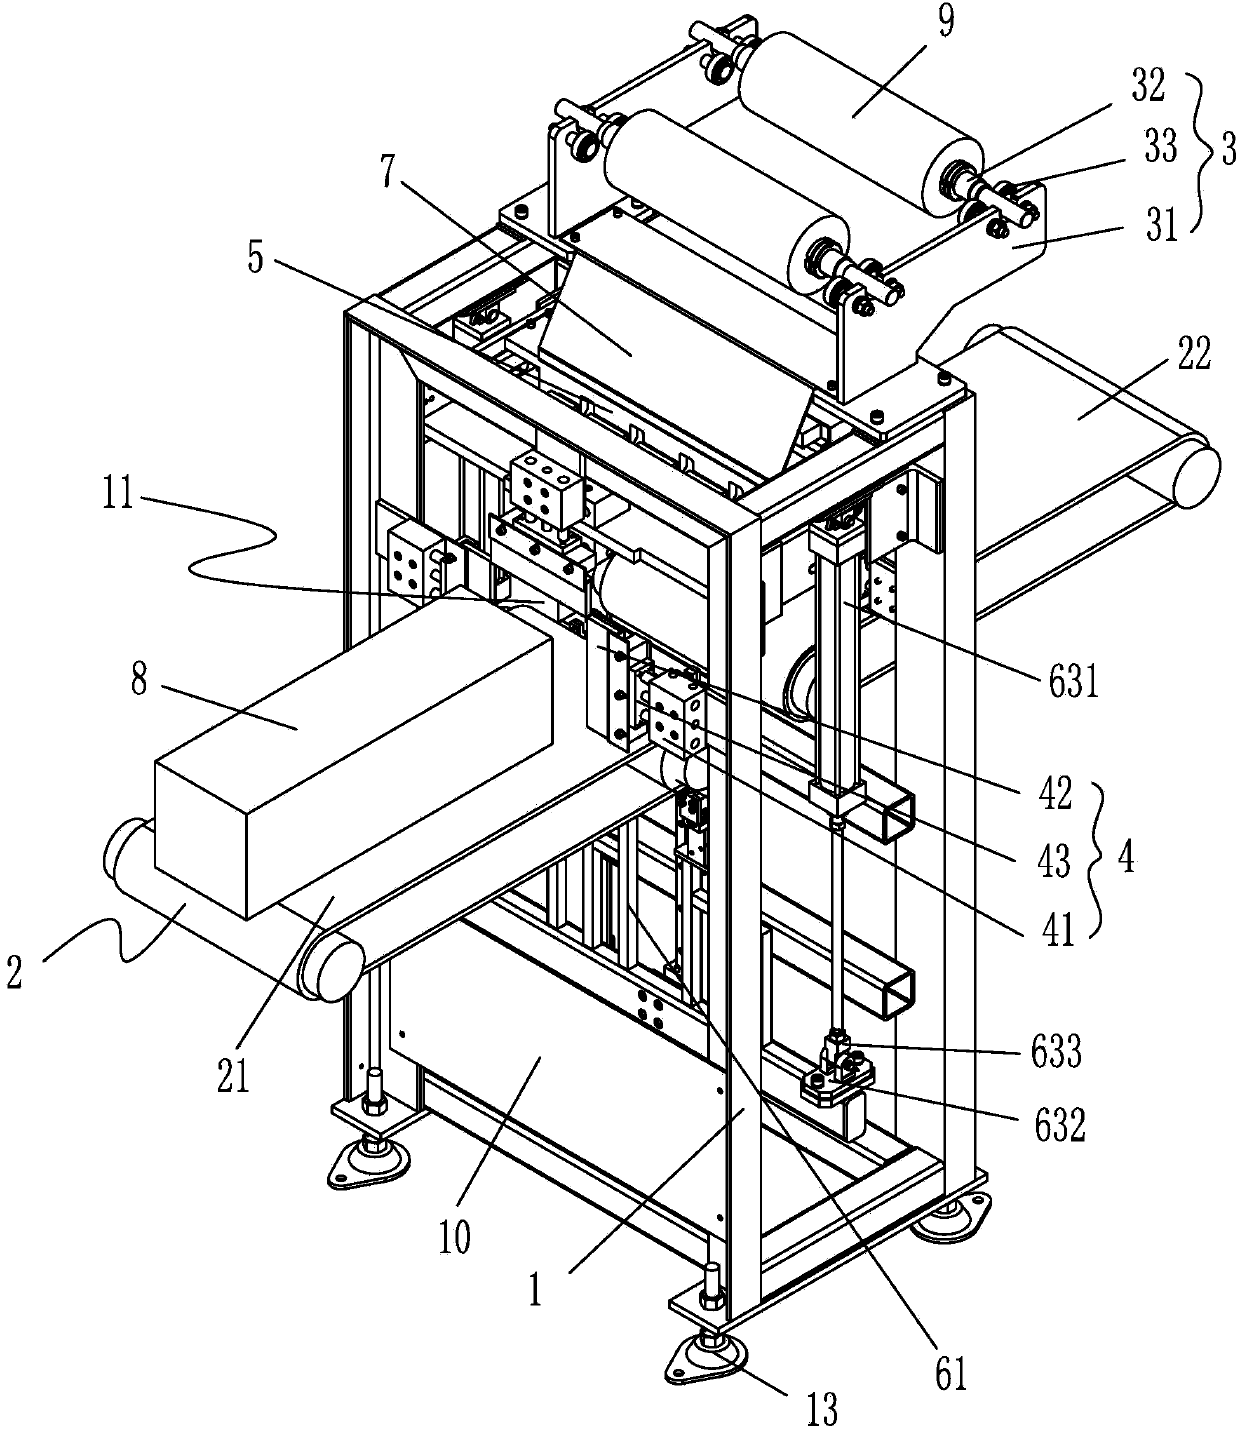 Film covering machine for film covering of ends of catalyst and film covering method of film covering machine